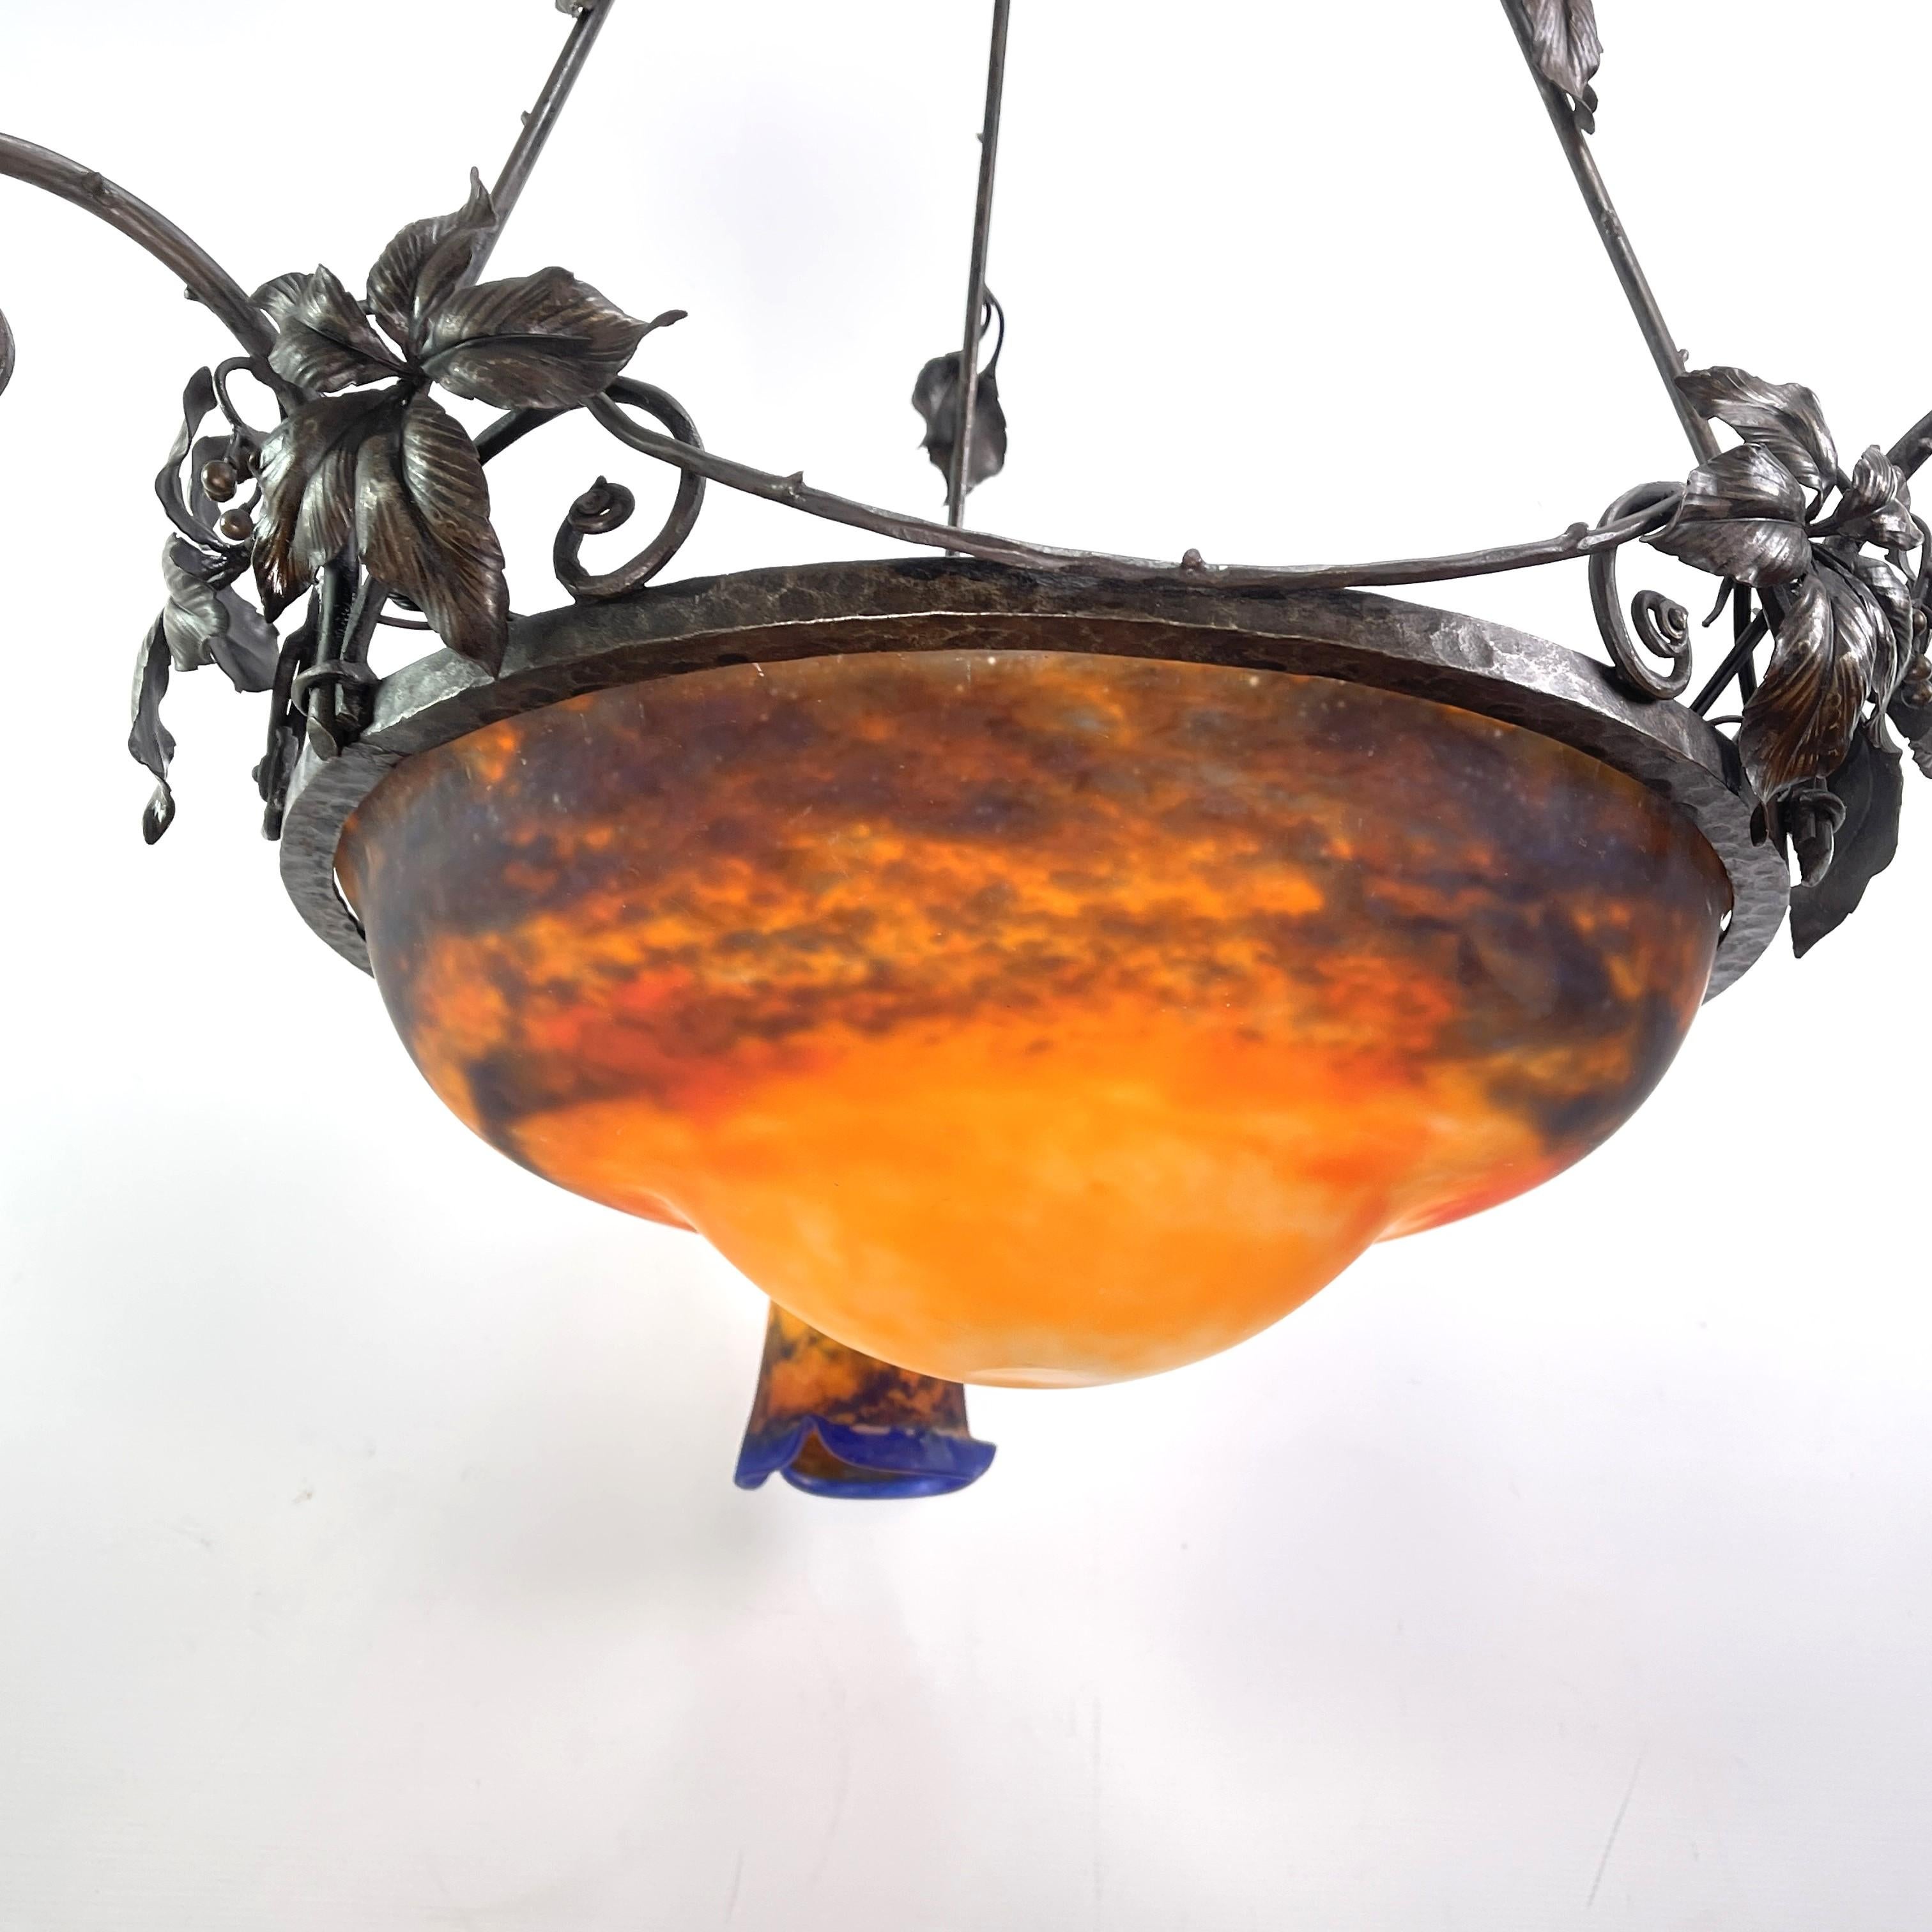 Mid-20th Century Art Deco wrought iron Lamp by Muller Freres, Luneville Pate de Verre, 1930s For Sale